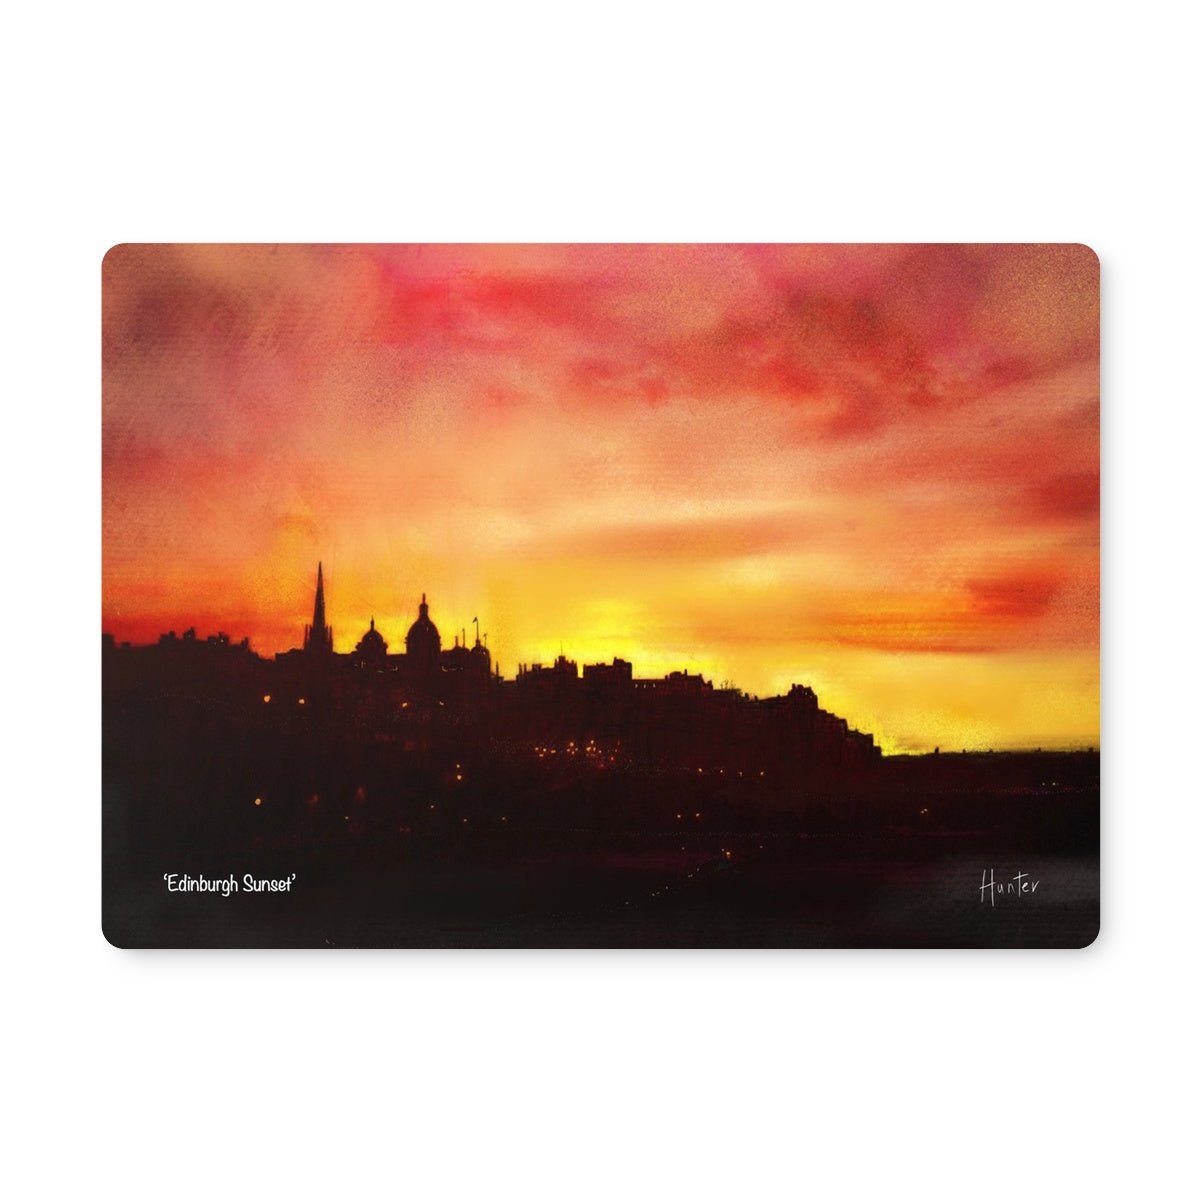 Edinburgh Sunset Art Gifts Placemat-Placemats-Edinburgh & Glasgow Art Gallery-6 Placemats-Paintings, Prints, Homeware, Art Gifts From Scotland By Scottish Artist Kevin Hunter